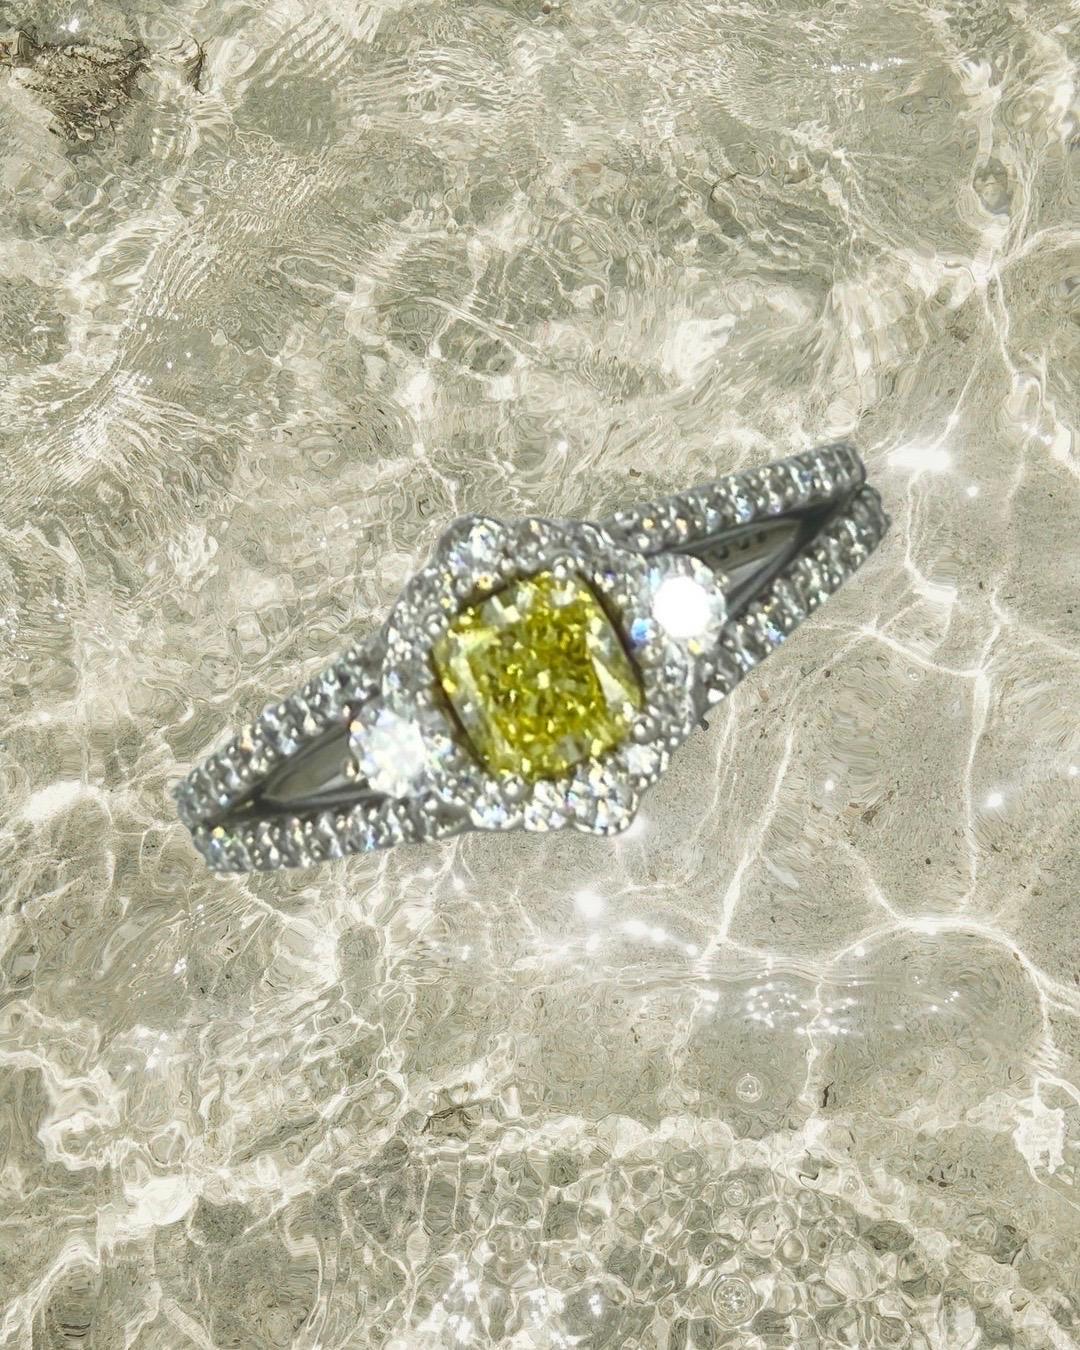 GIA Certified 0.56 Carat Center Natural Fancy Yellow Intense Diamond Engagement Ring.
GIA certificate # 15619202
The total carat in diamonds weights 1.15 carats.
The ring features a very rare Intense Yellow fancy color diamond center weighing 0.56